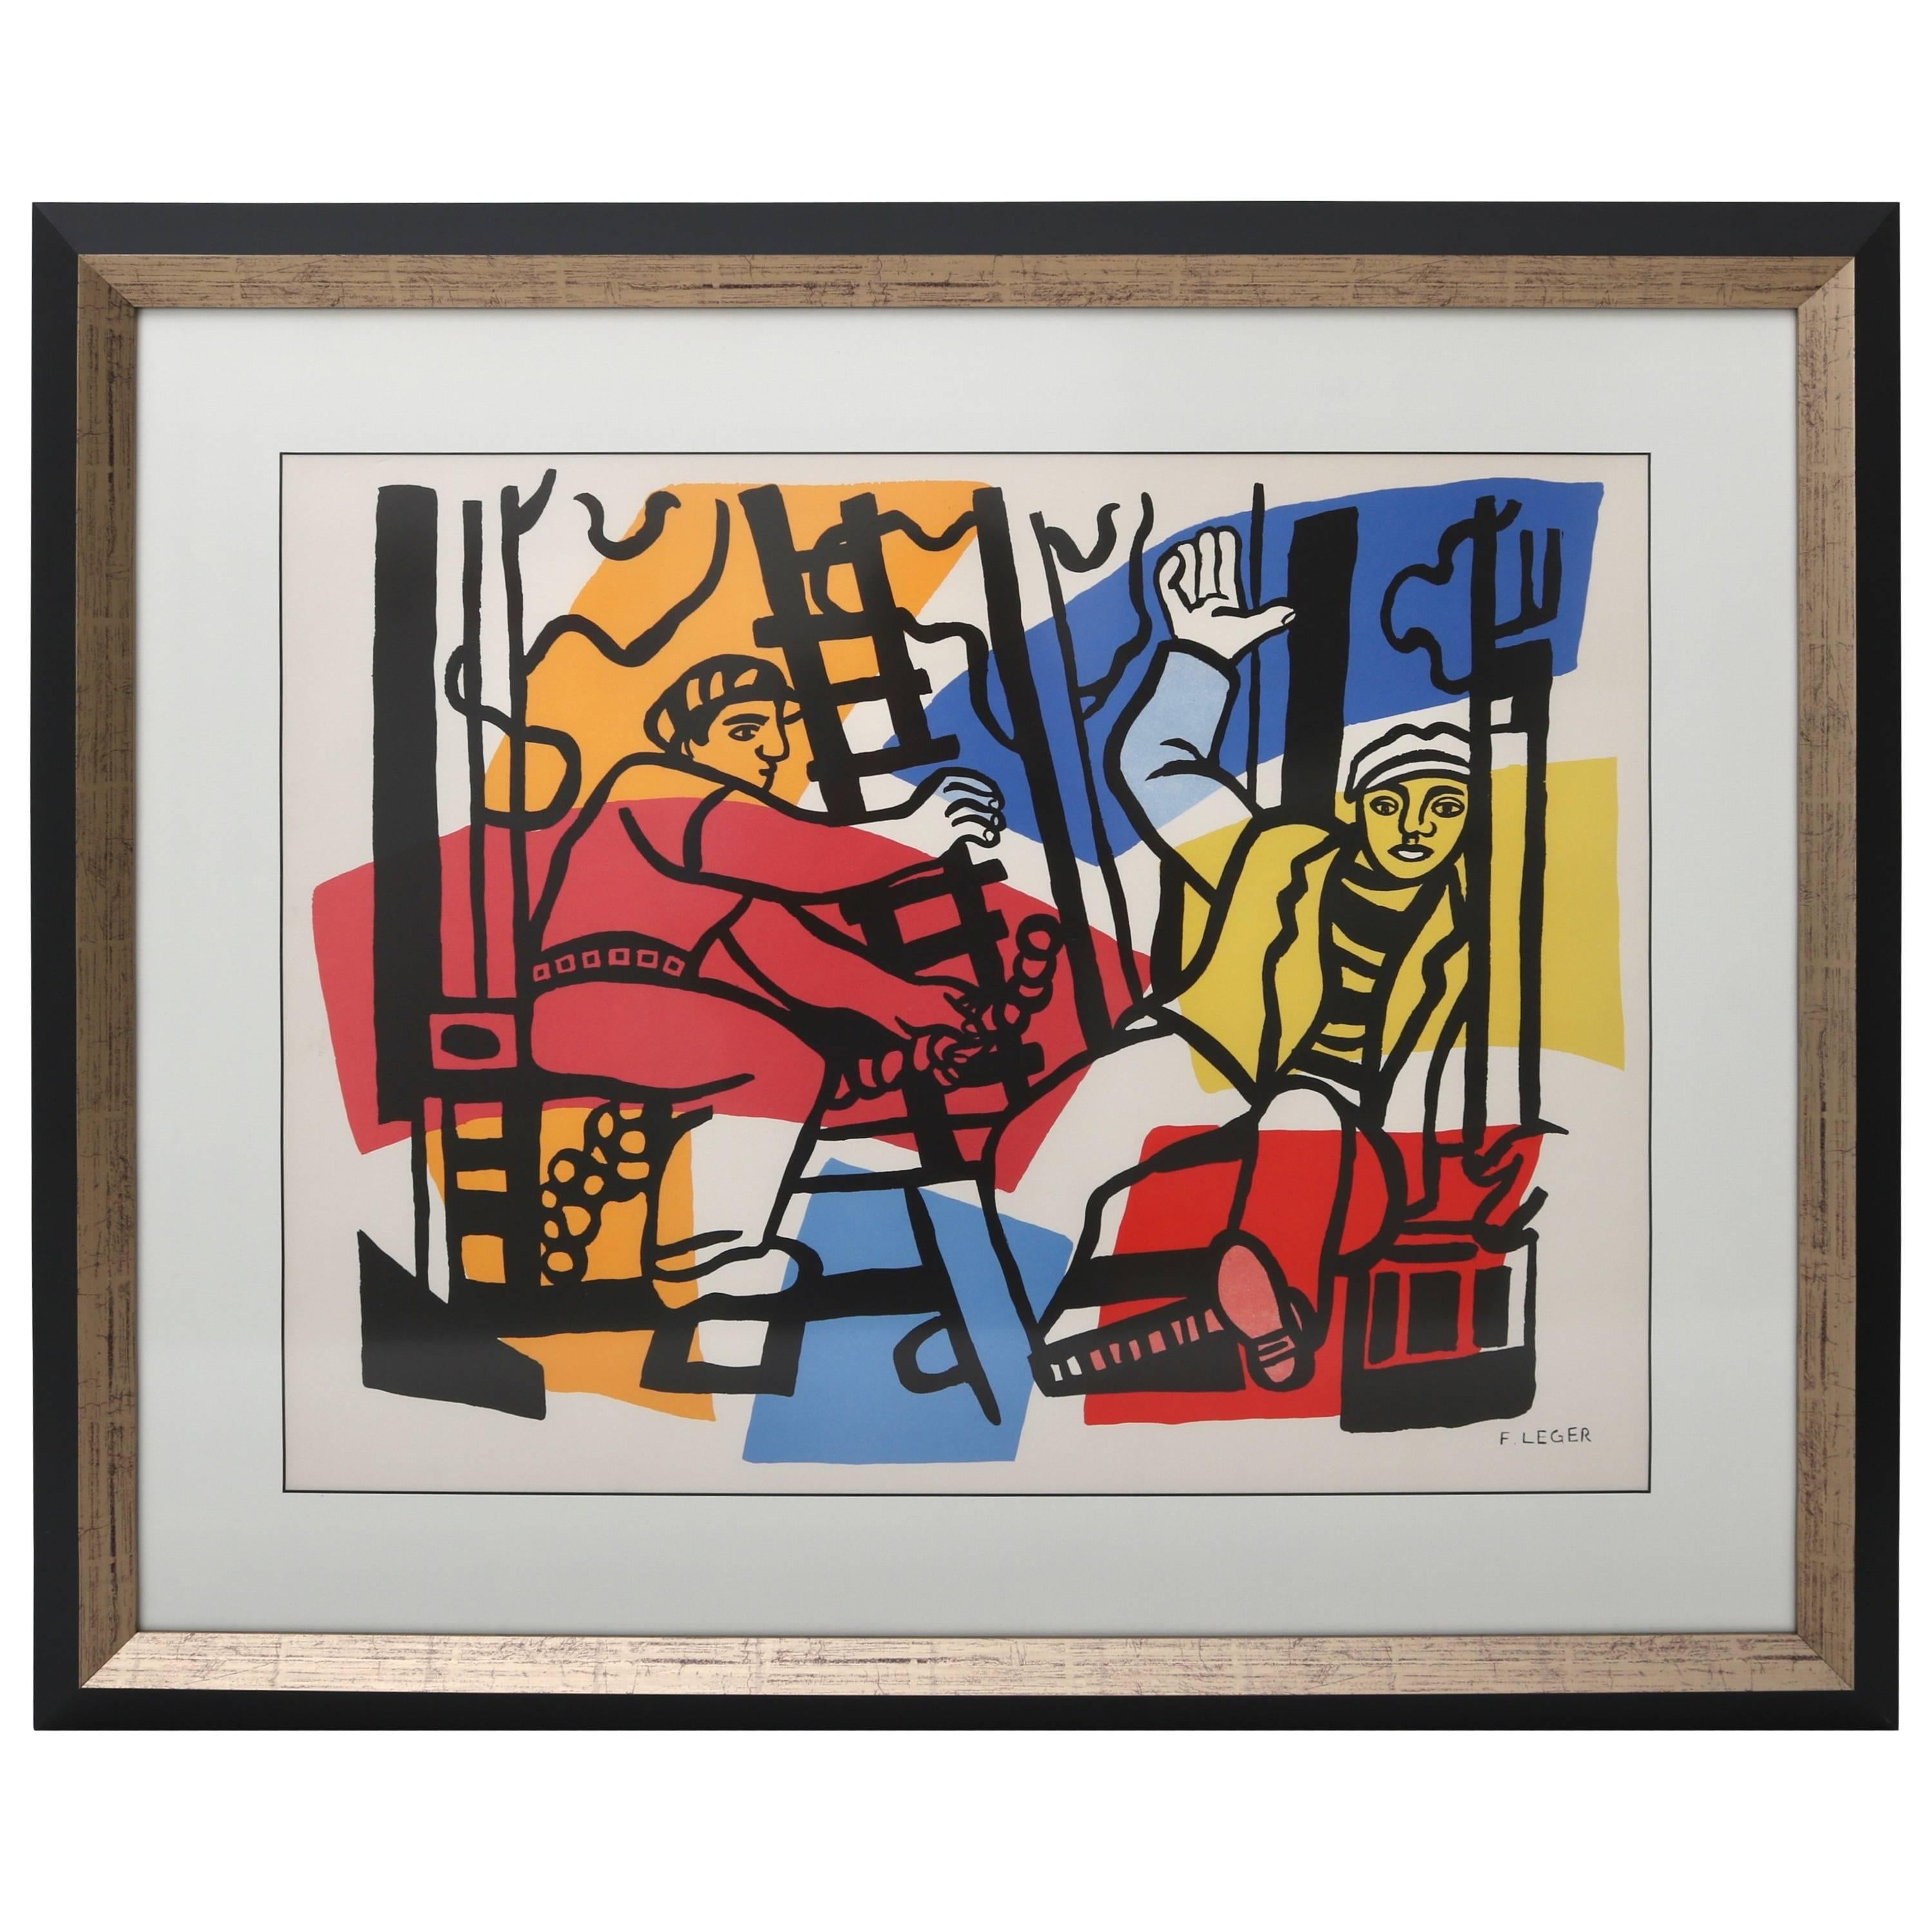 Lithograph Print, After Fernand Leger, from "the Construction Worker" Series